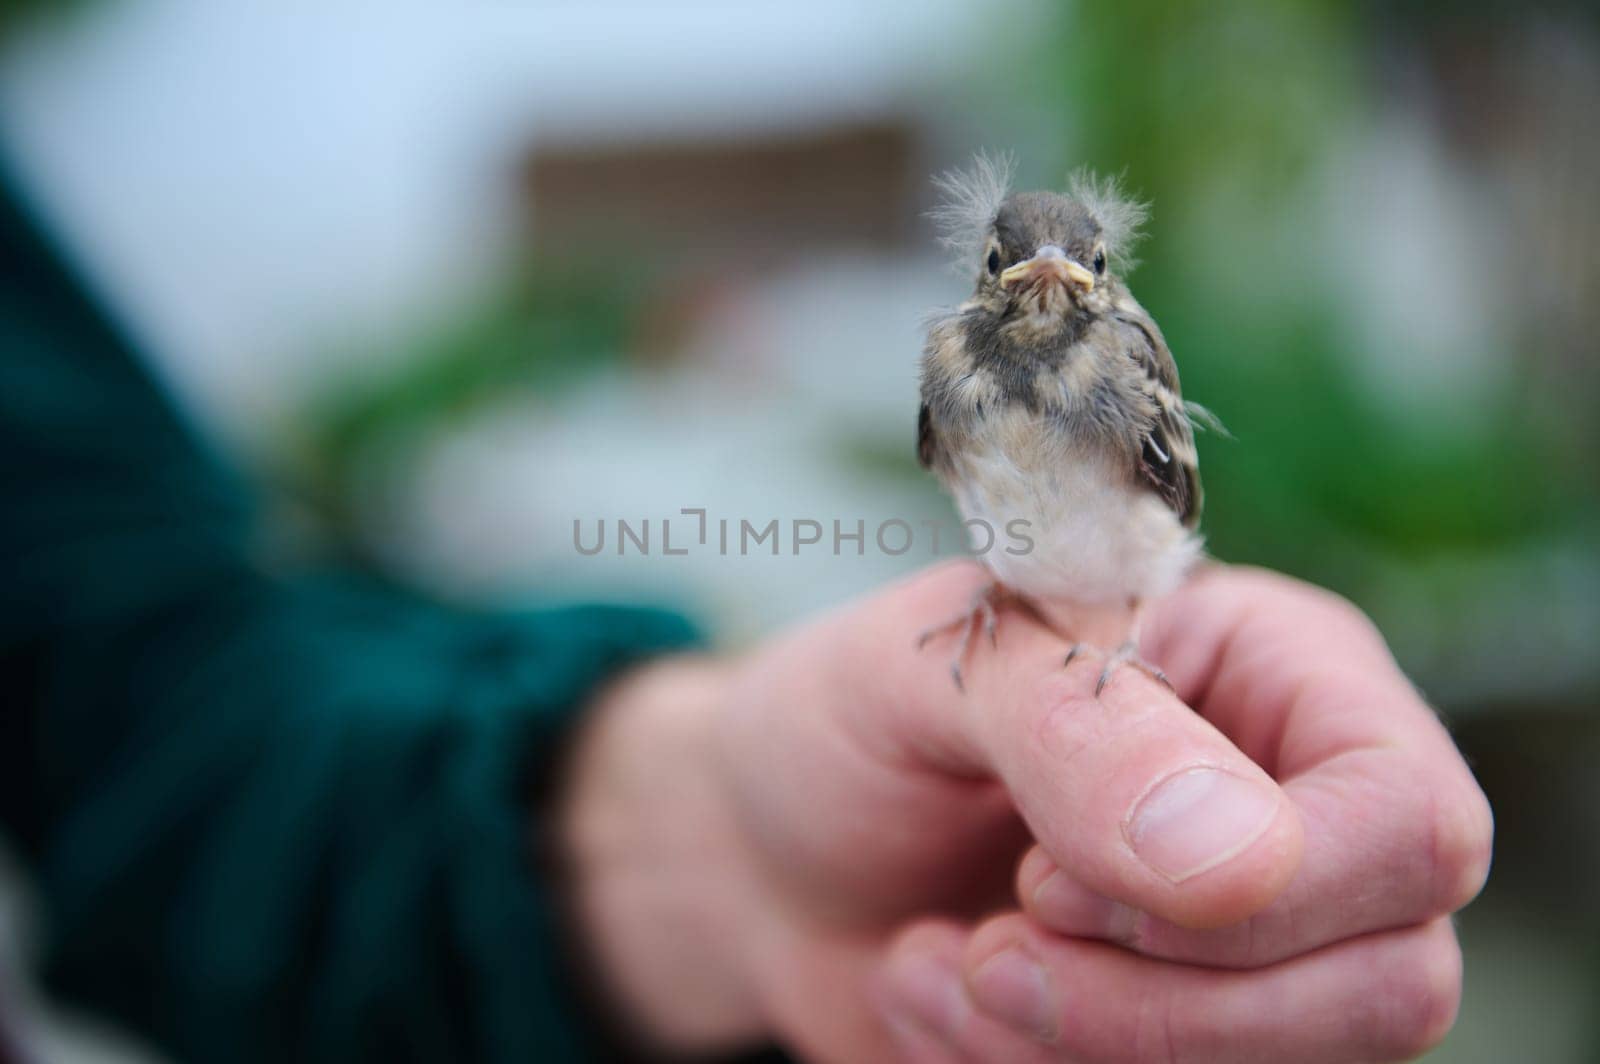 Close-up view of a small baby bird sitting in the hands of a man. People and animals themes by artgf